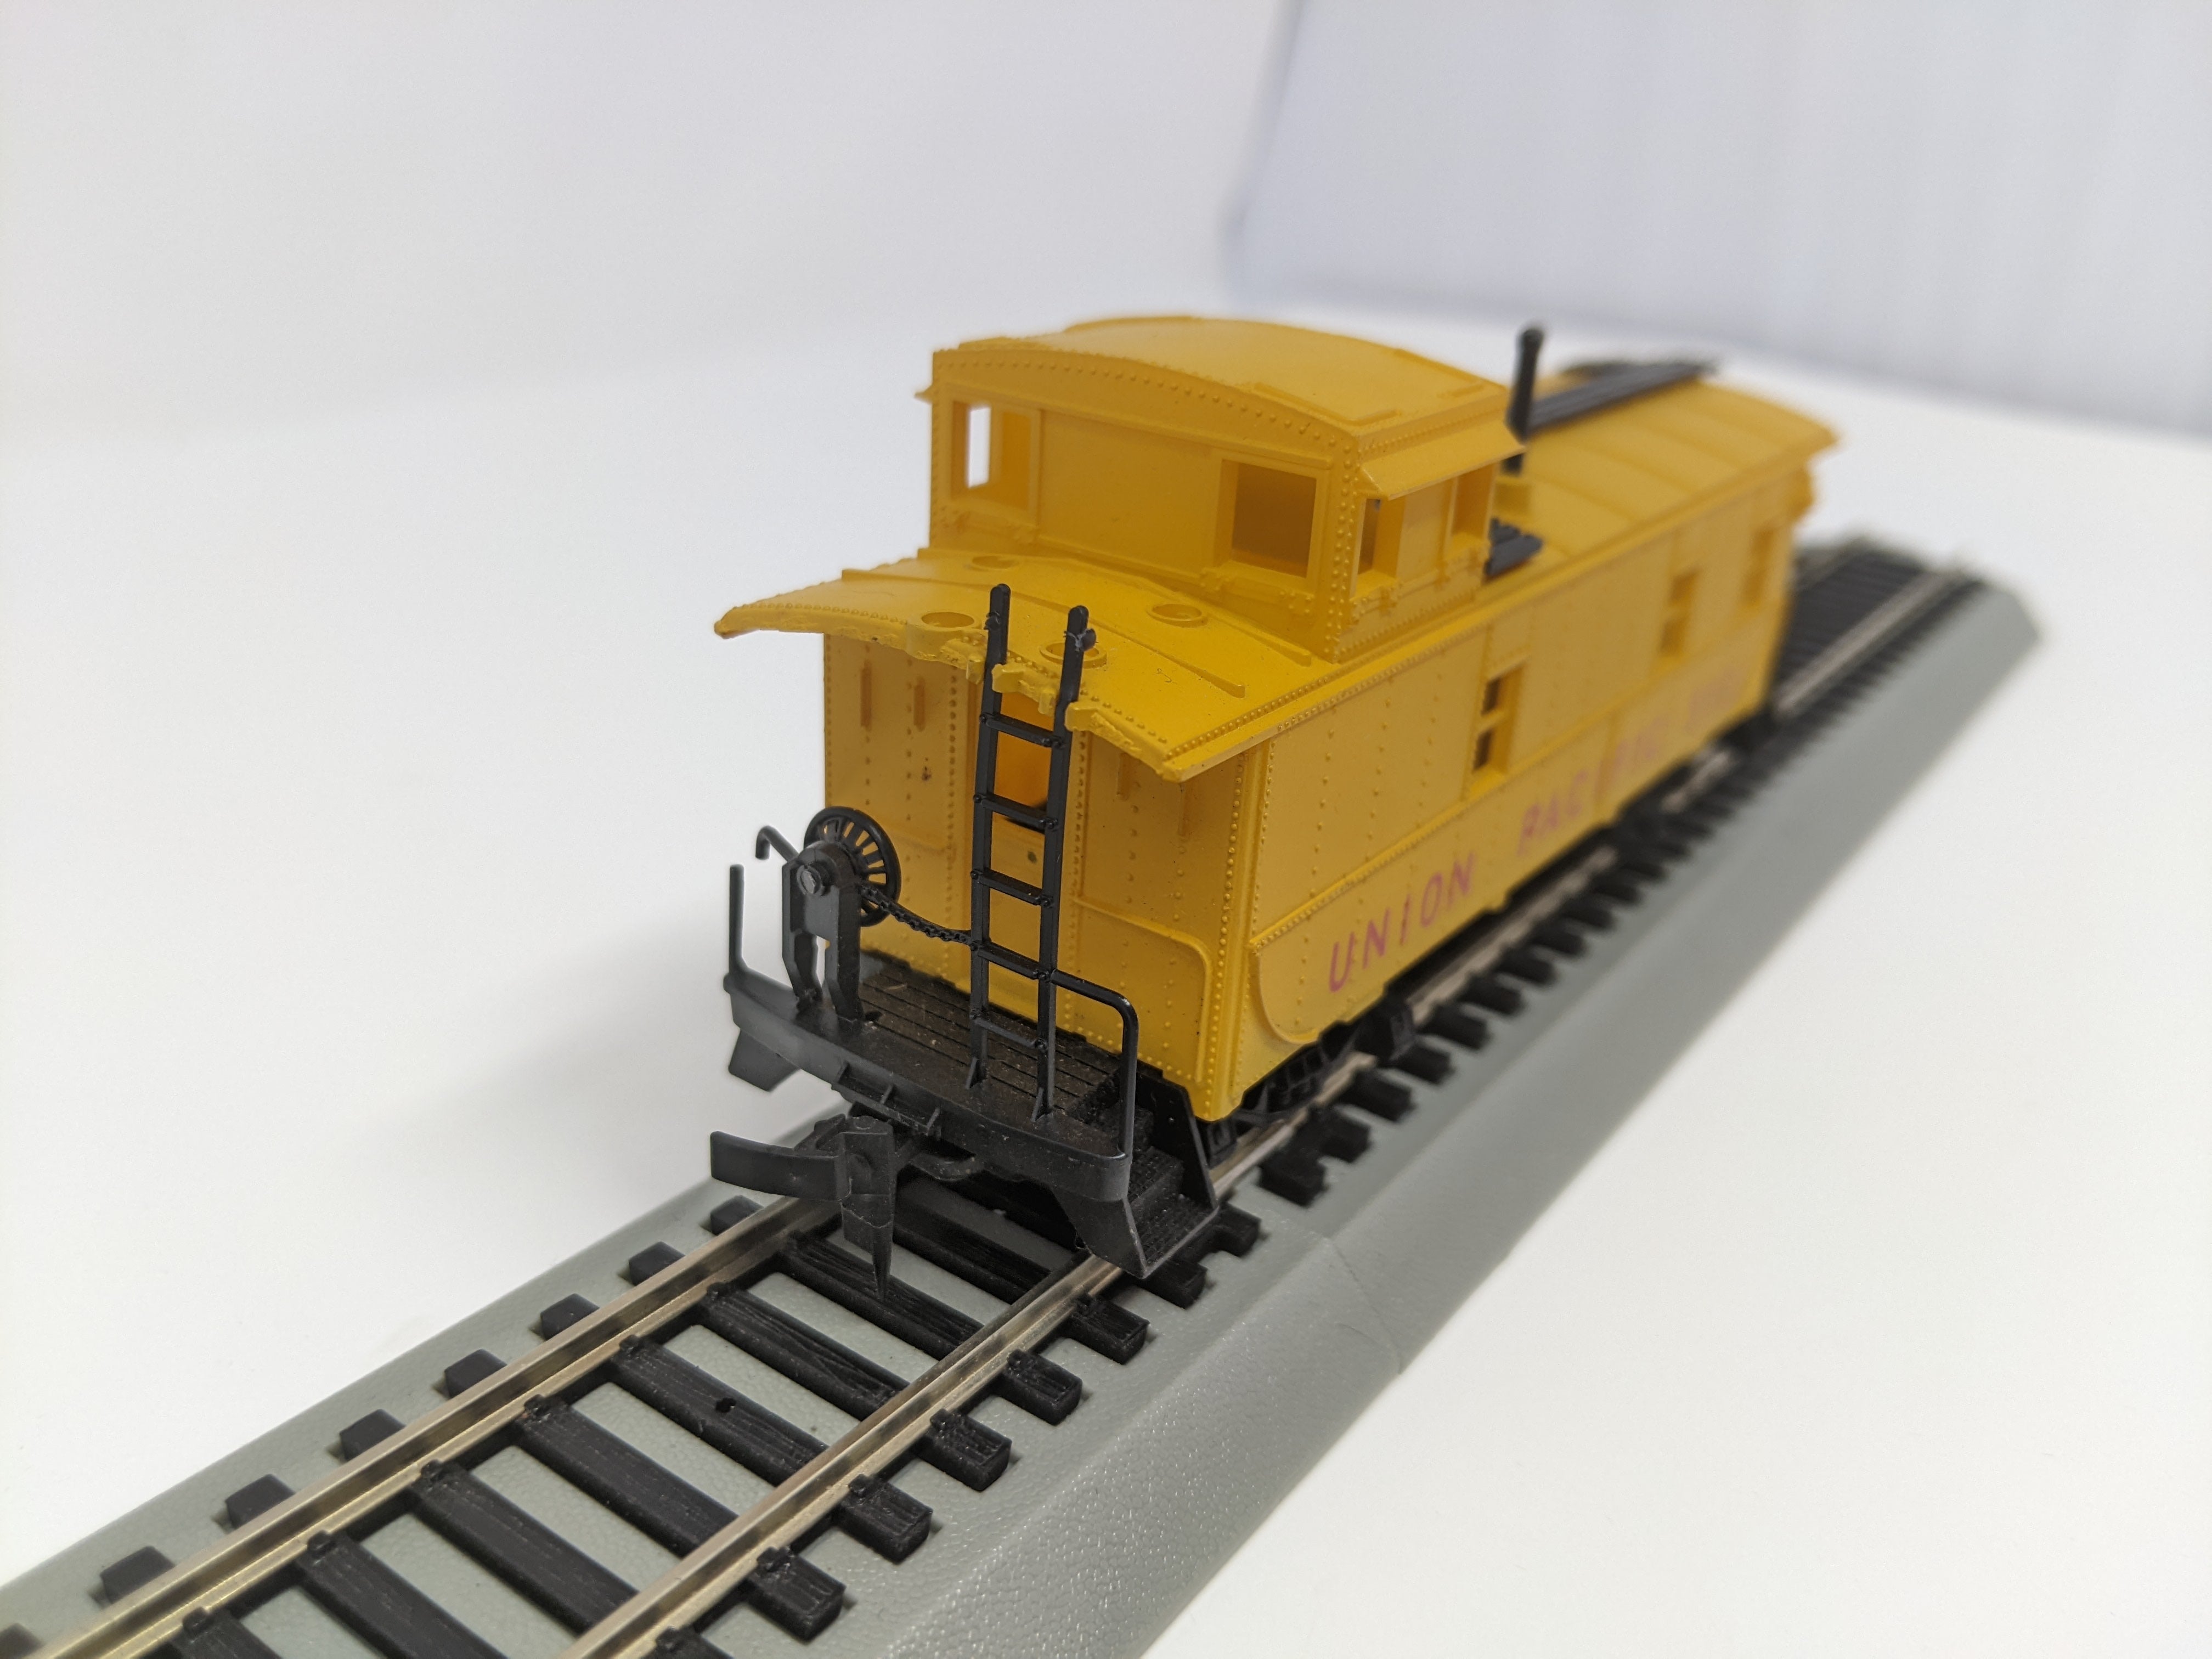 USED AHM HO Scale, Caboose, Union Pacific #510